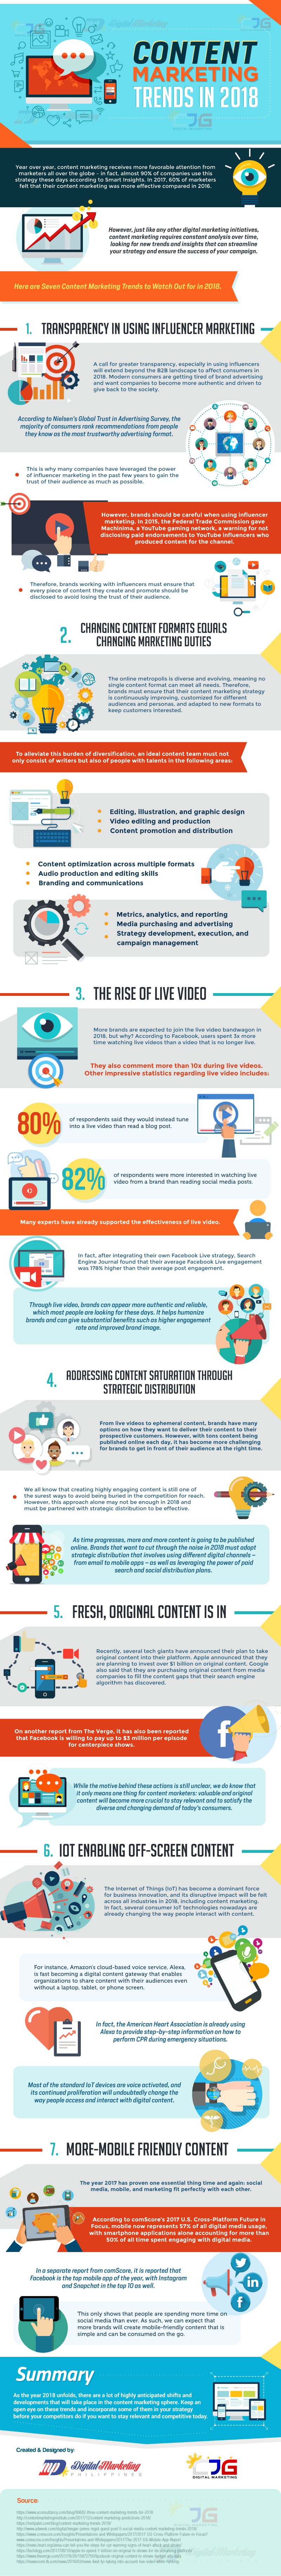 Content Marketing Trends in 2018 - #infographic